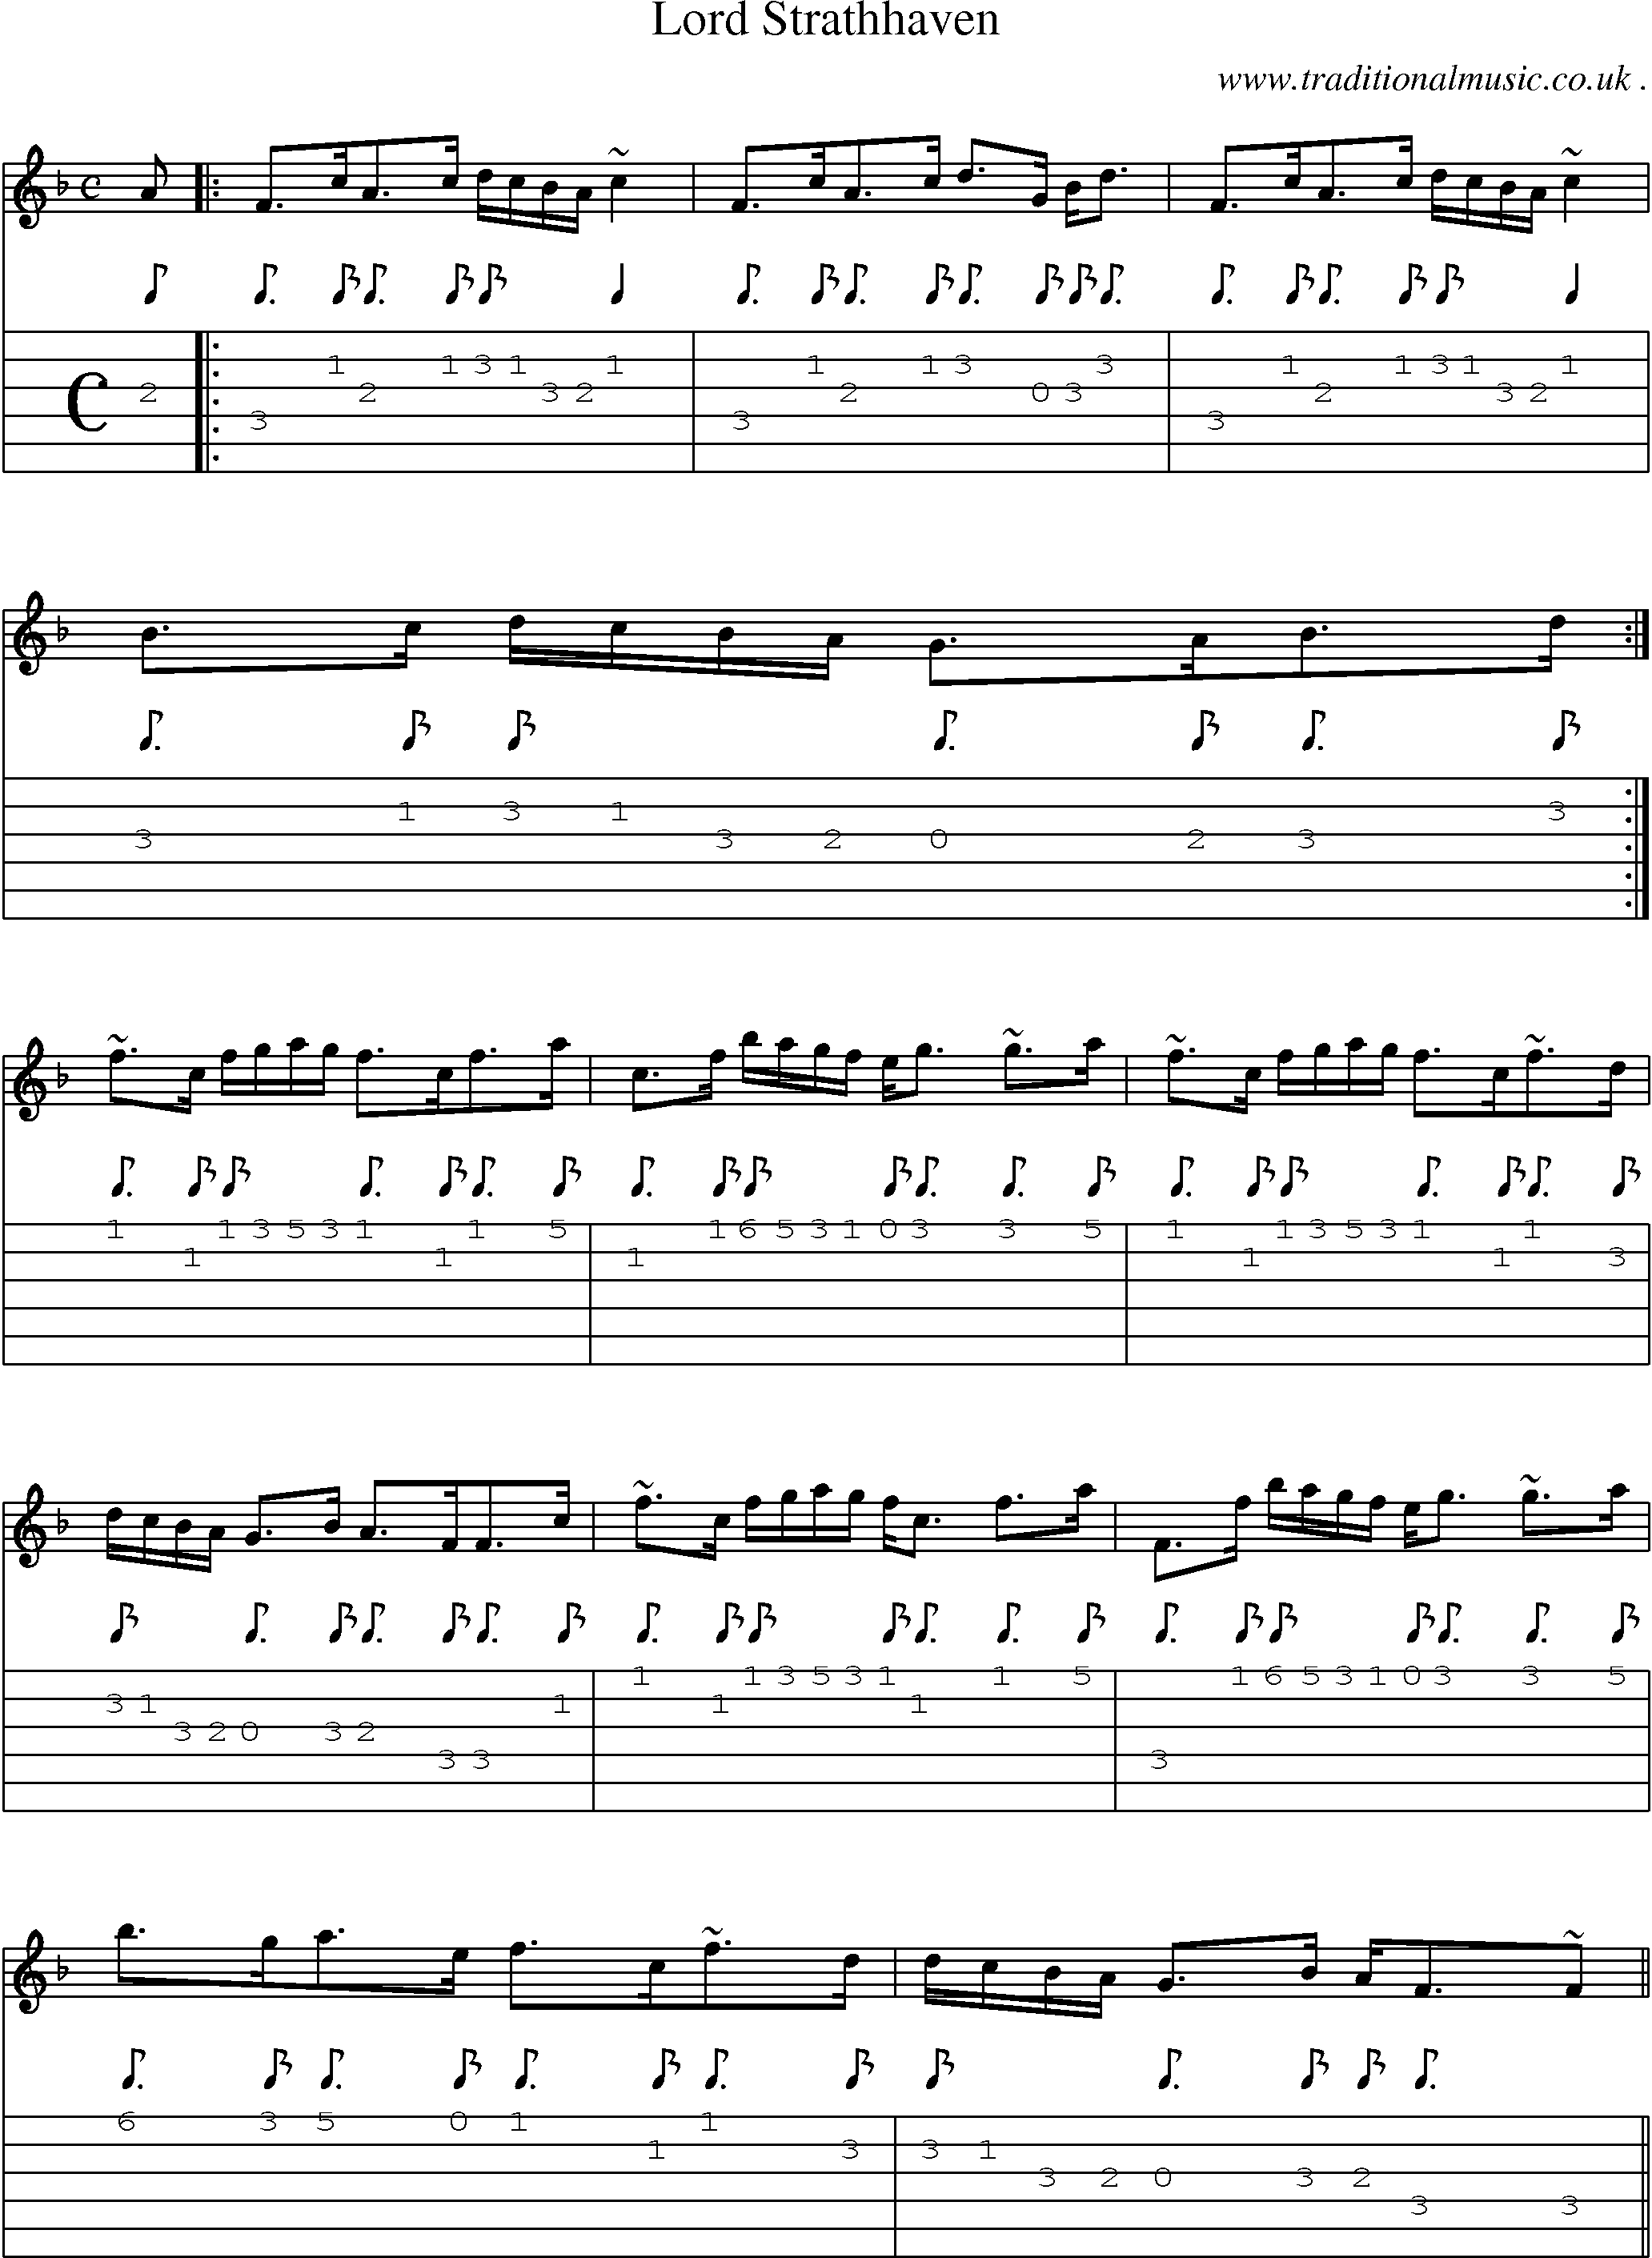 Sheet-music  score, Chords and Guitar Tabs for Lord Strathhaven